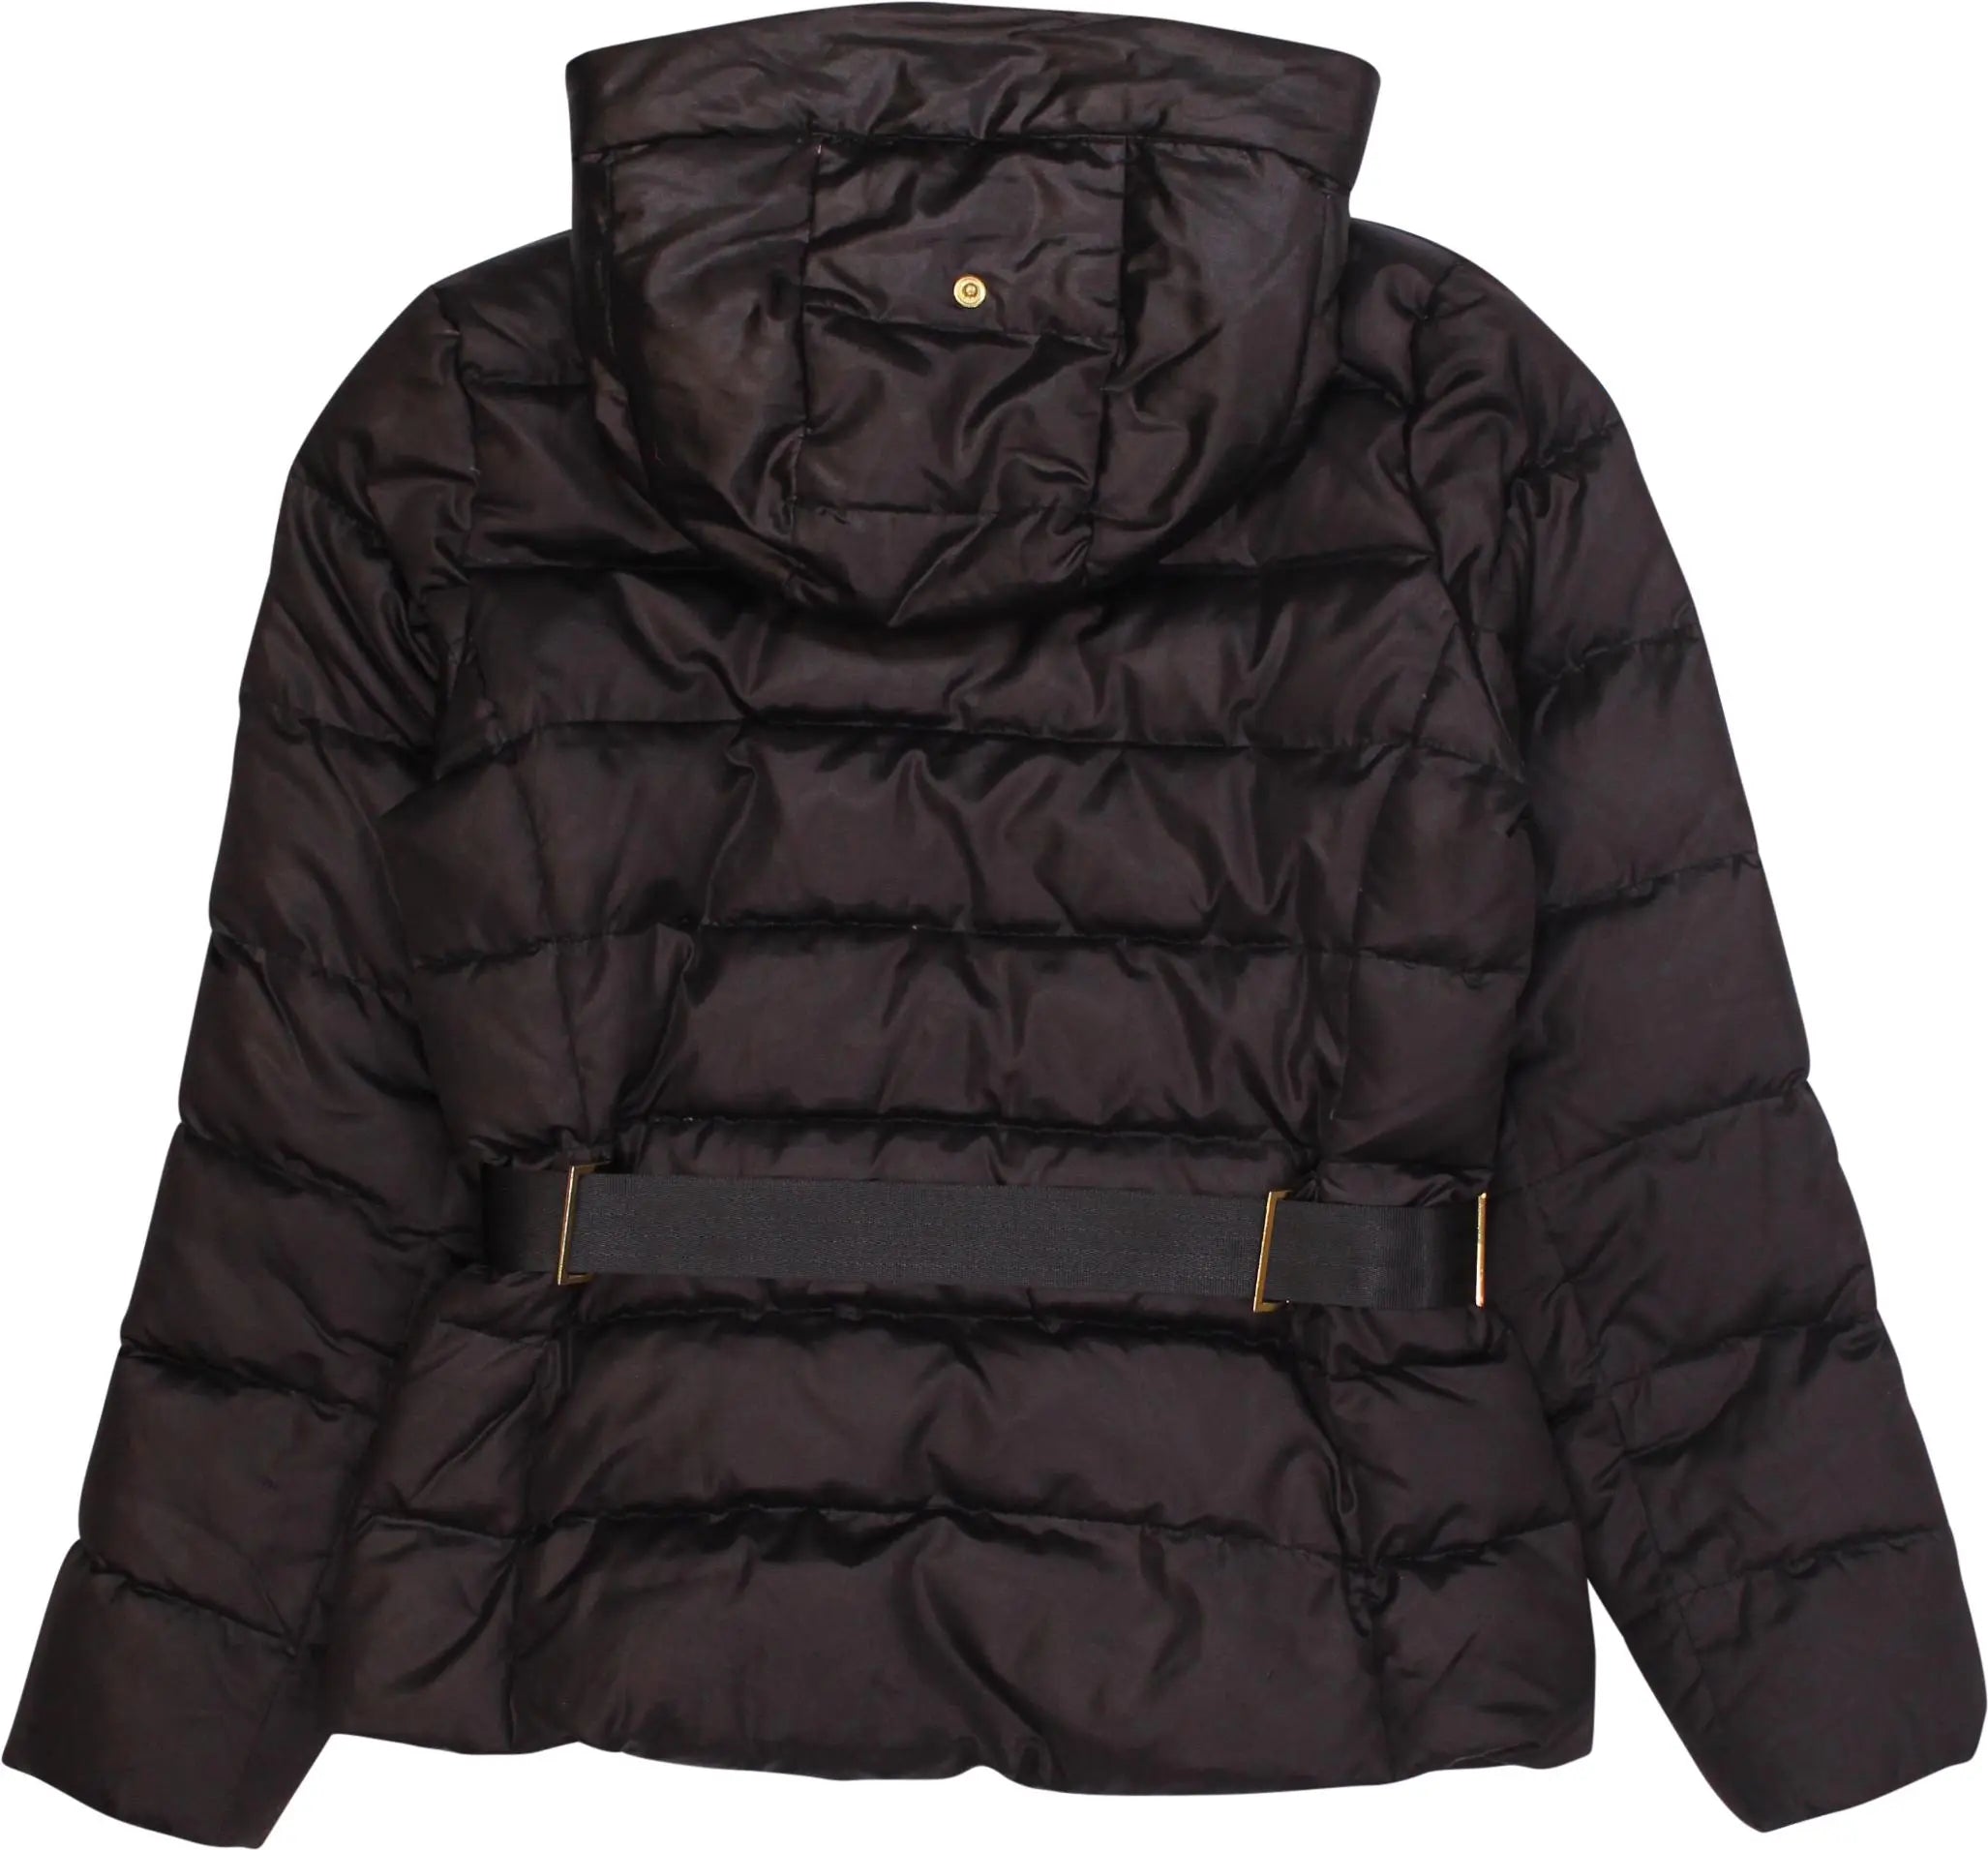 Moncler - Winter Jacket with Hoodie by Moncler- ThriftTale.com - Vintage and second handclothing